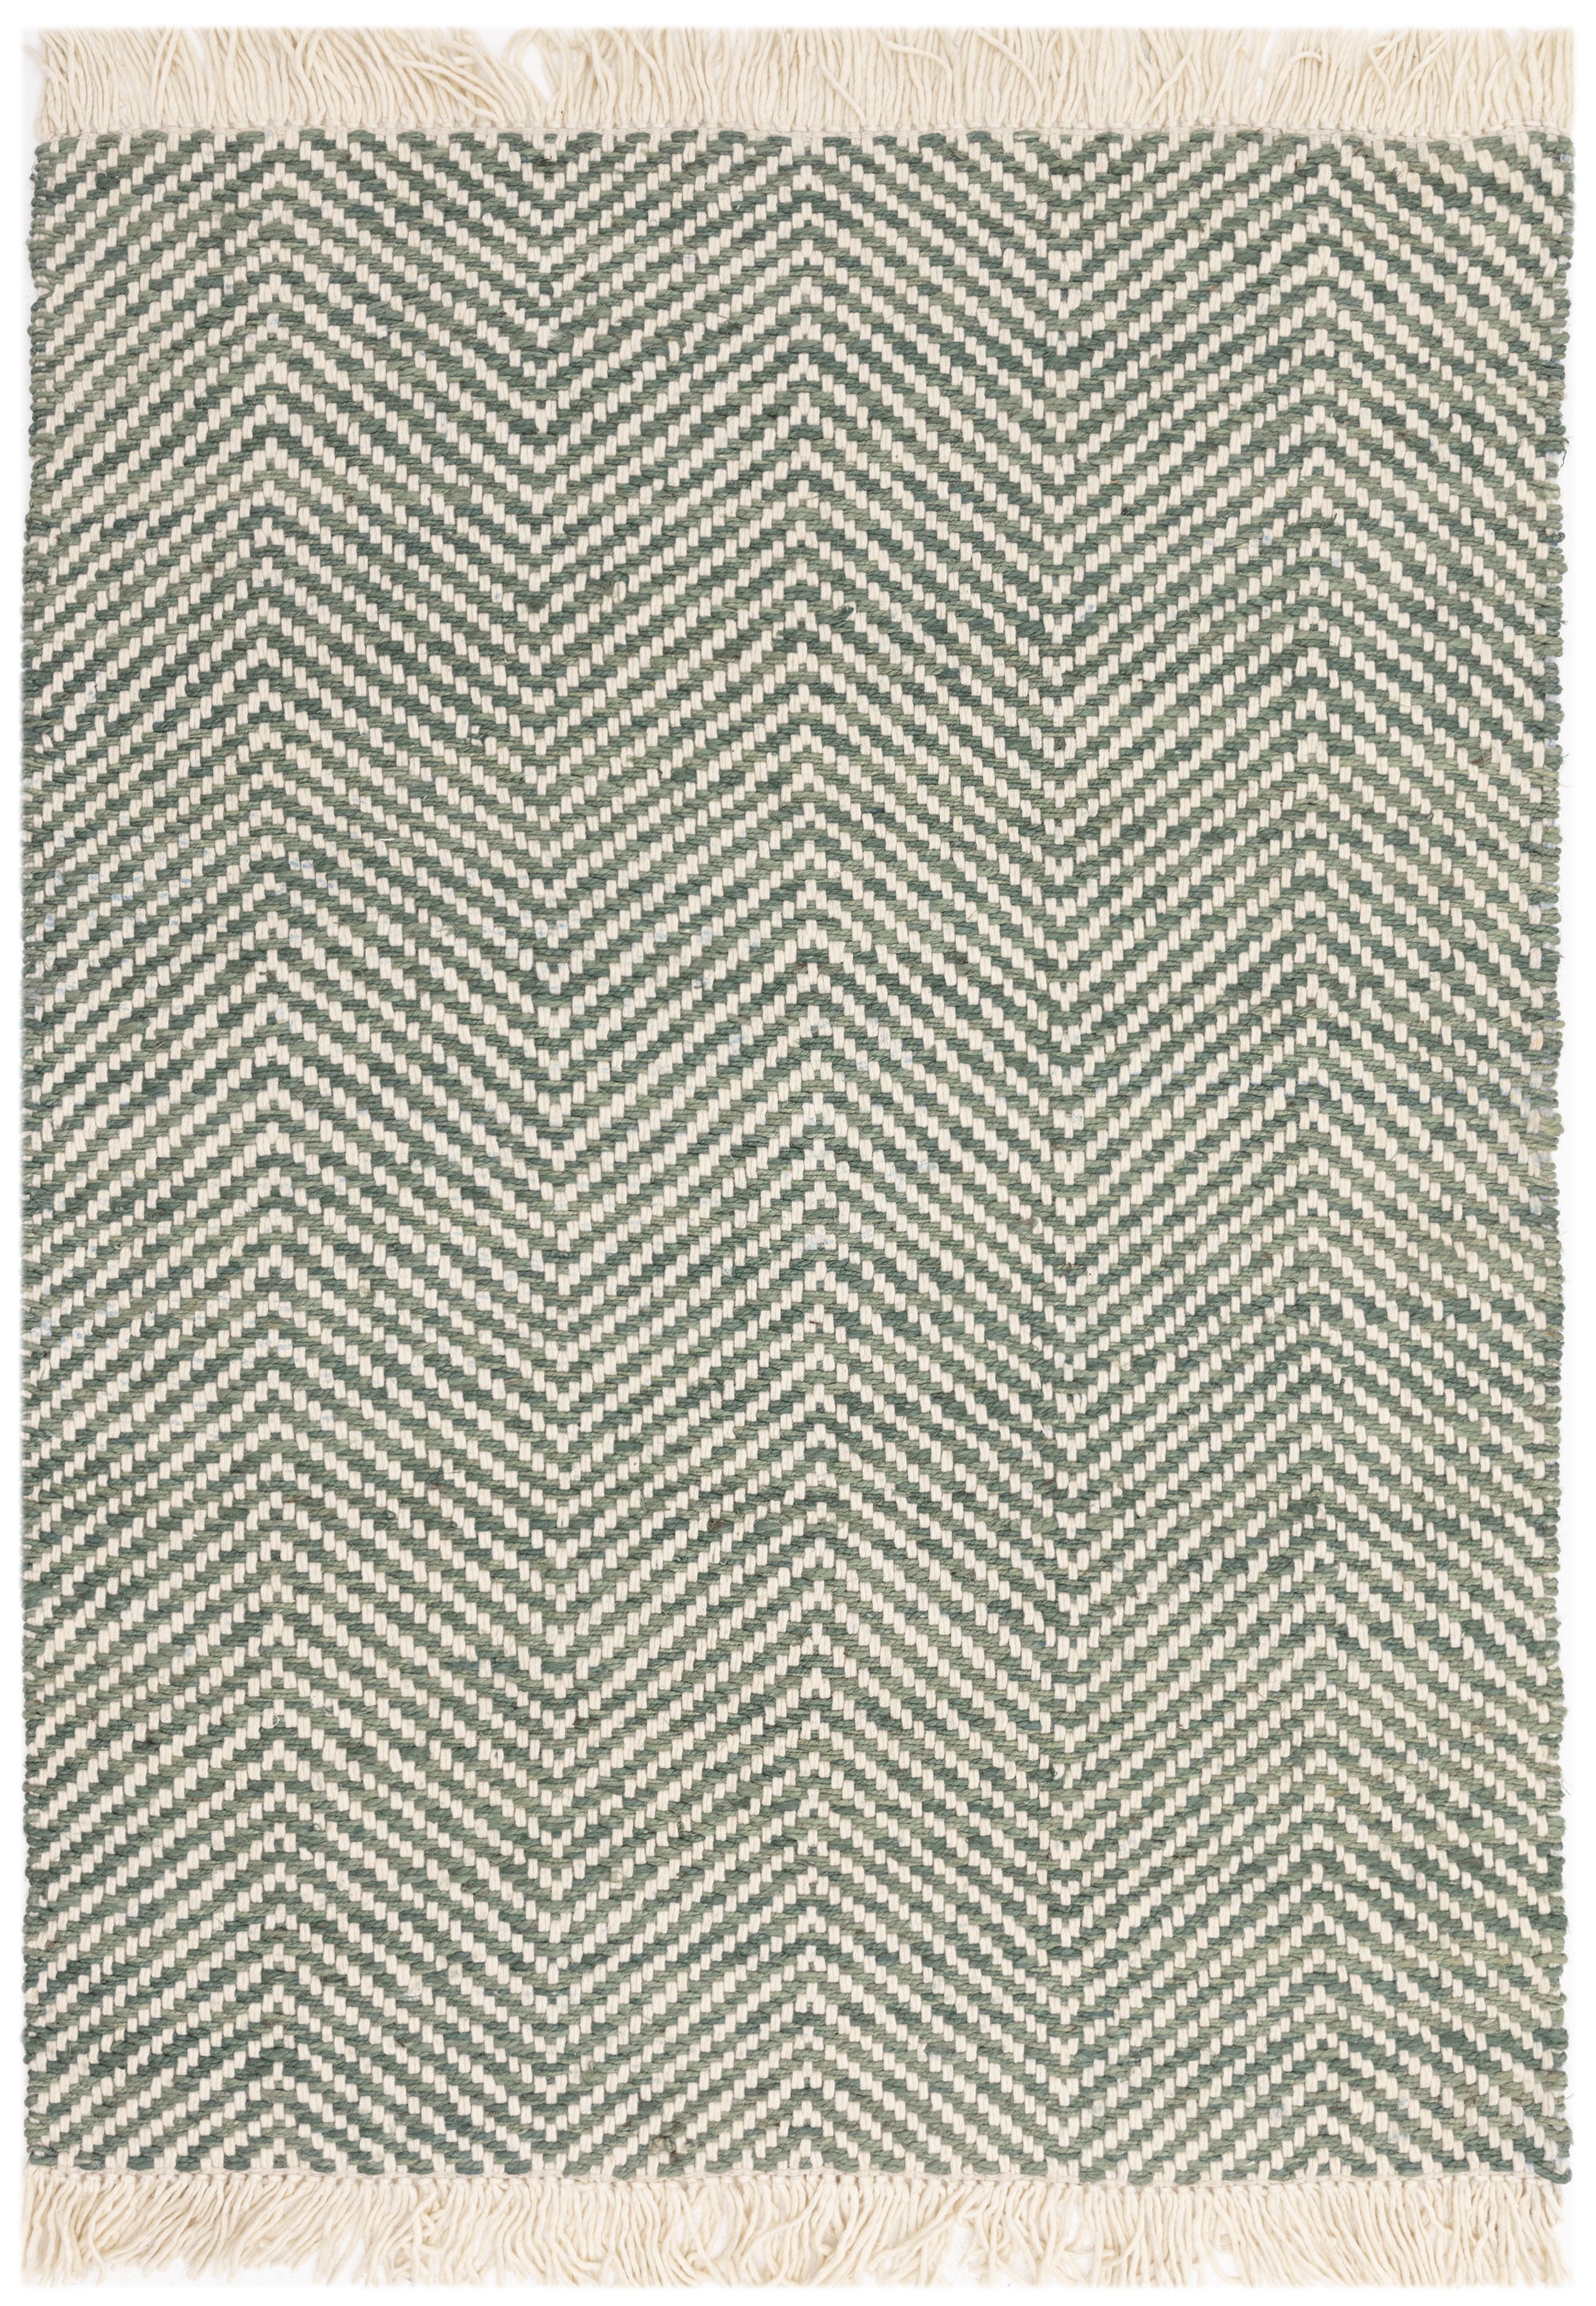 Textured woven rug with green and cream chevron pattern